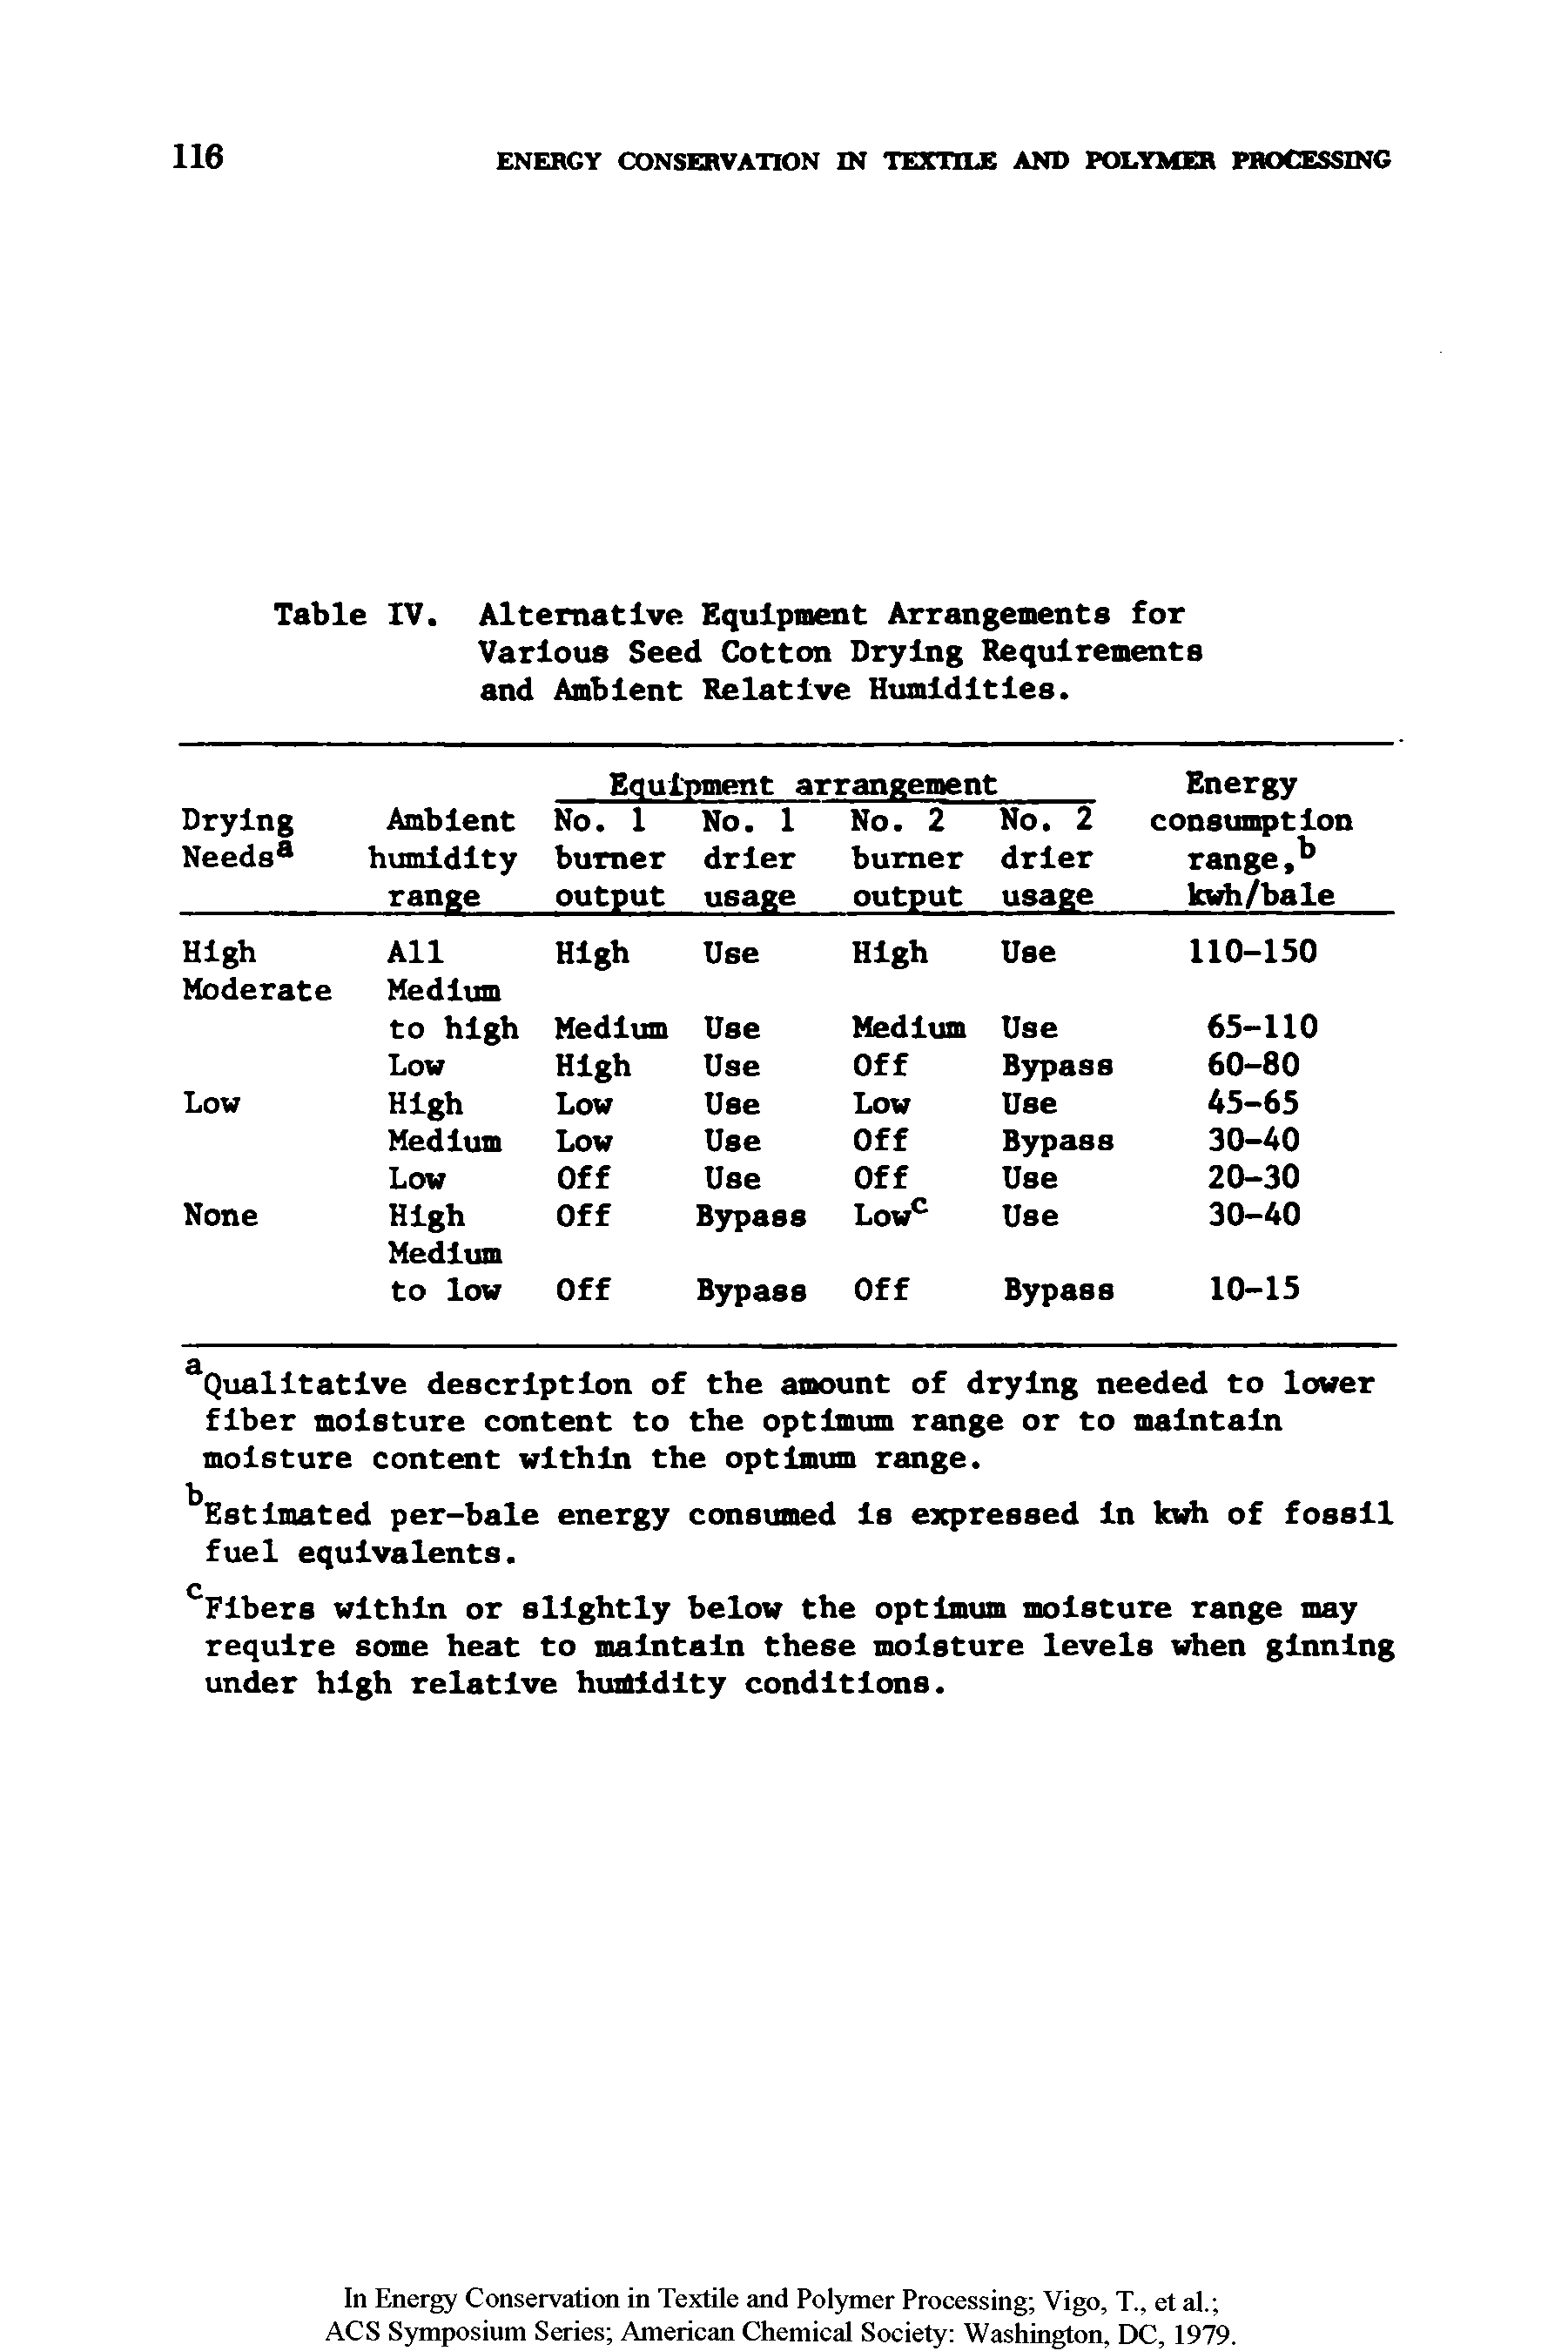 Table IV. Alternative Equipment Arrangements for Various Seed Cotton Drying Requirements and Ambient Relative Humidities.